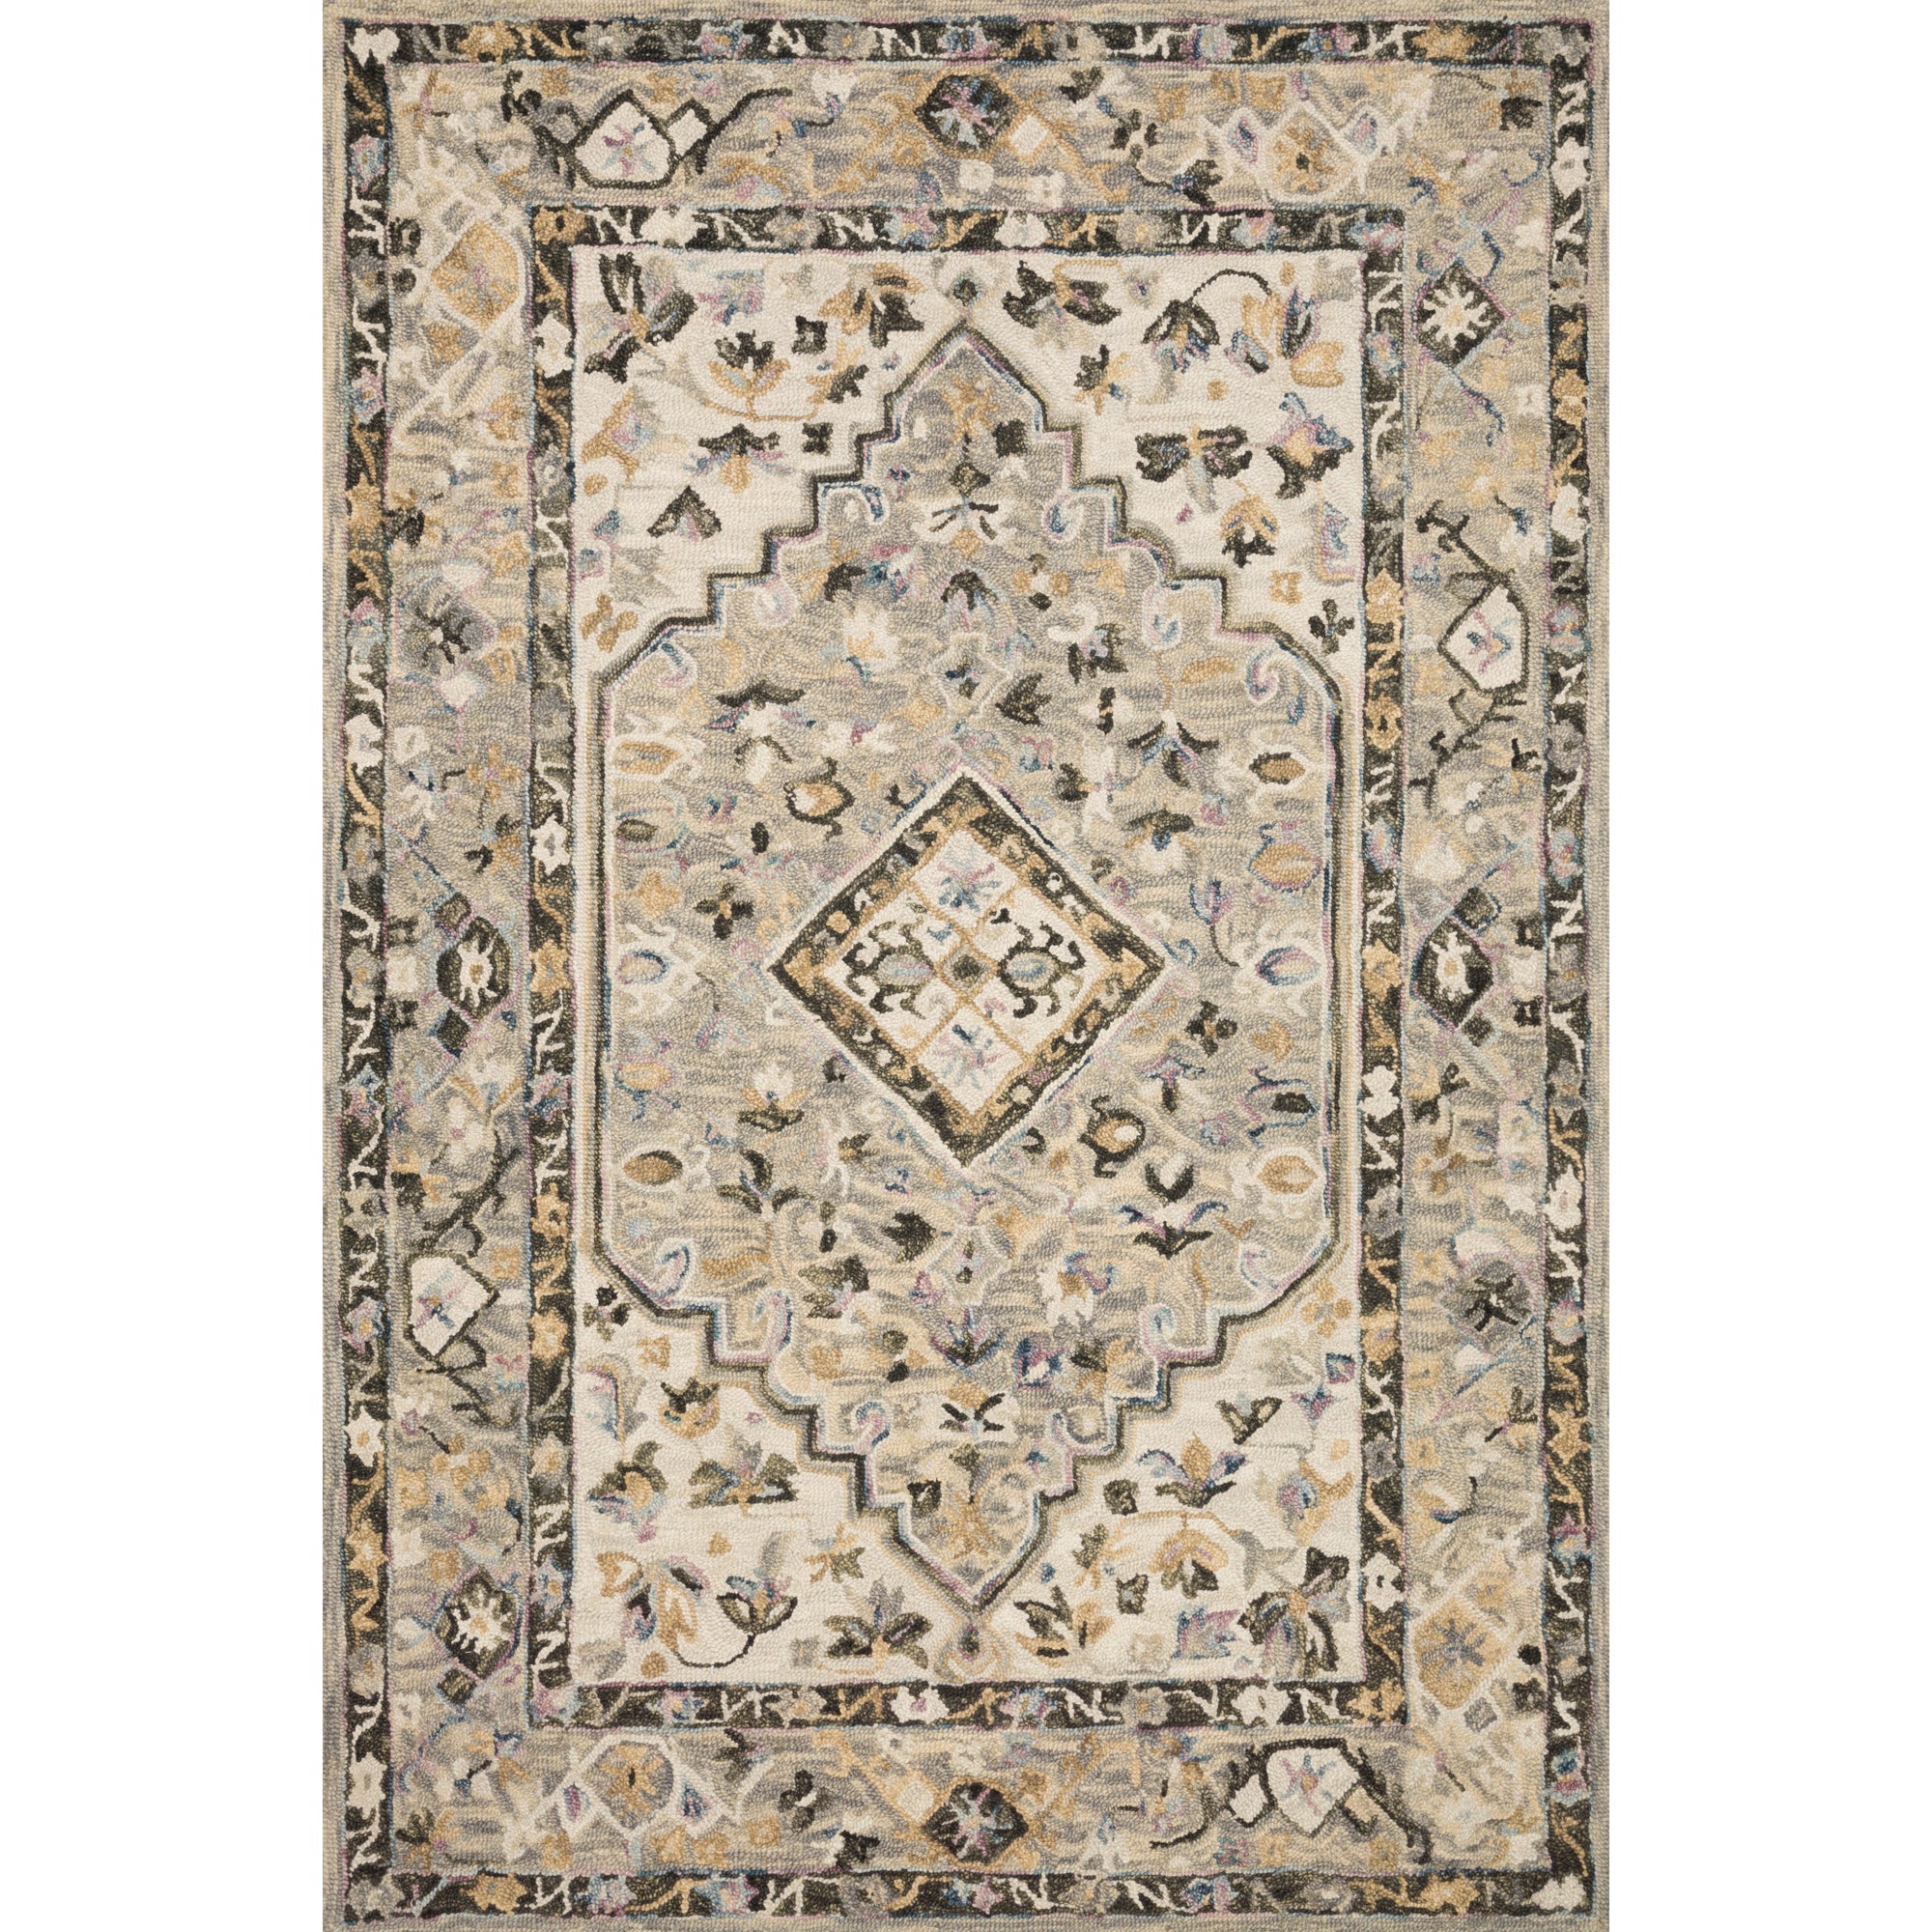 Rugs by Roo Loloi Beatty Grey Ivory Area Rug in size 18" x 18" Sample